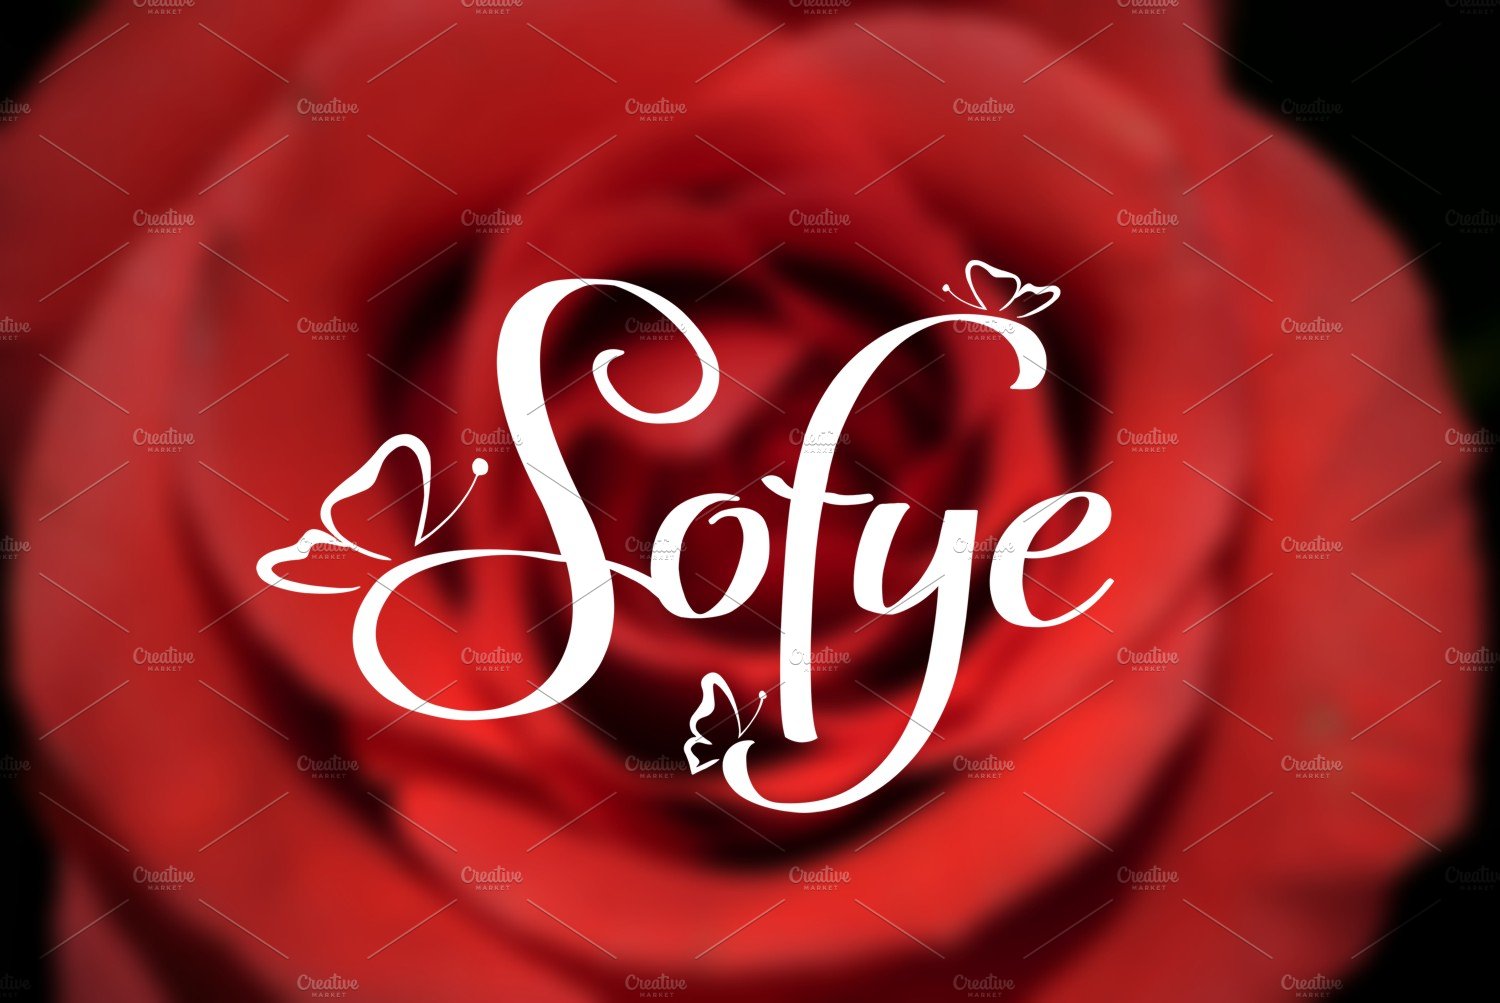 Sofye preview image.